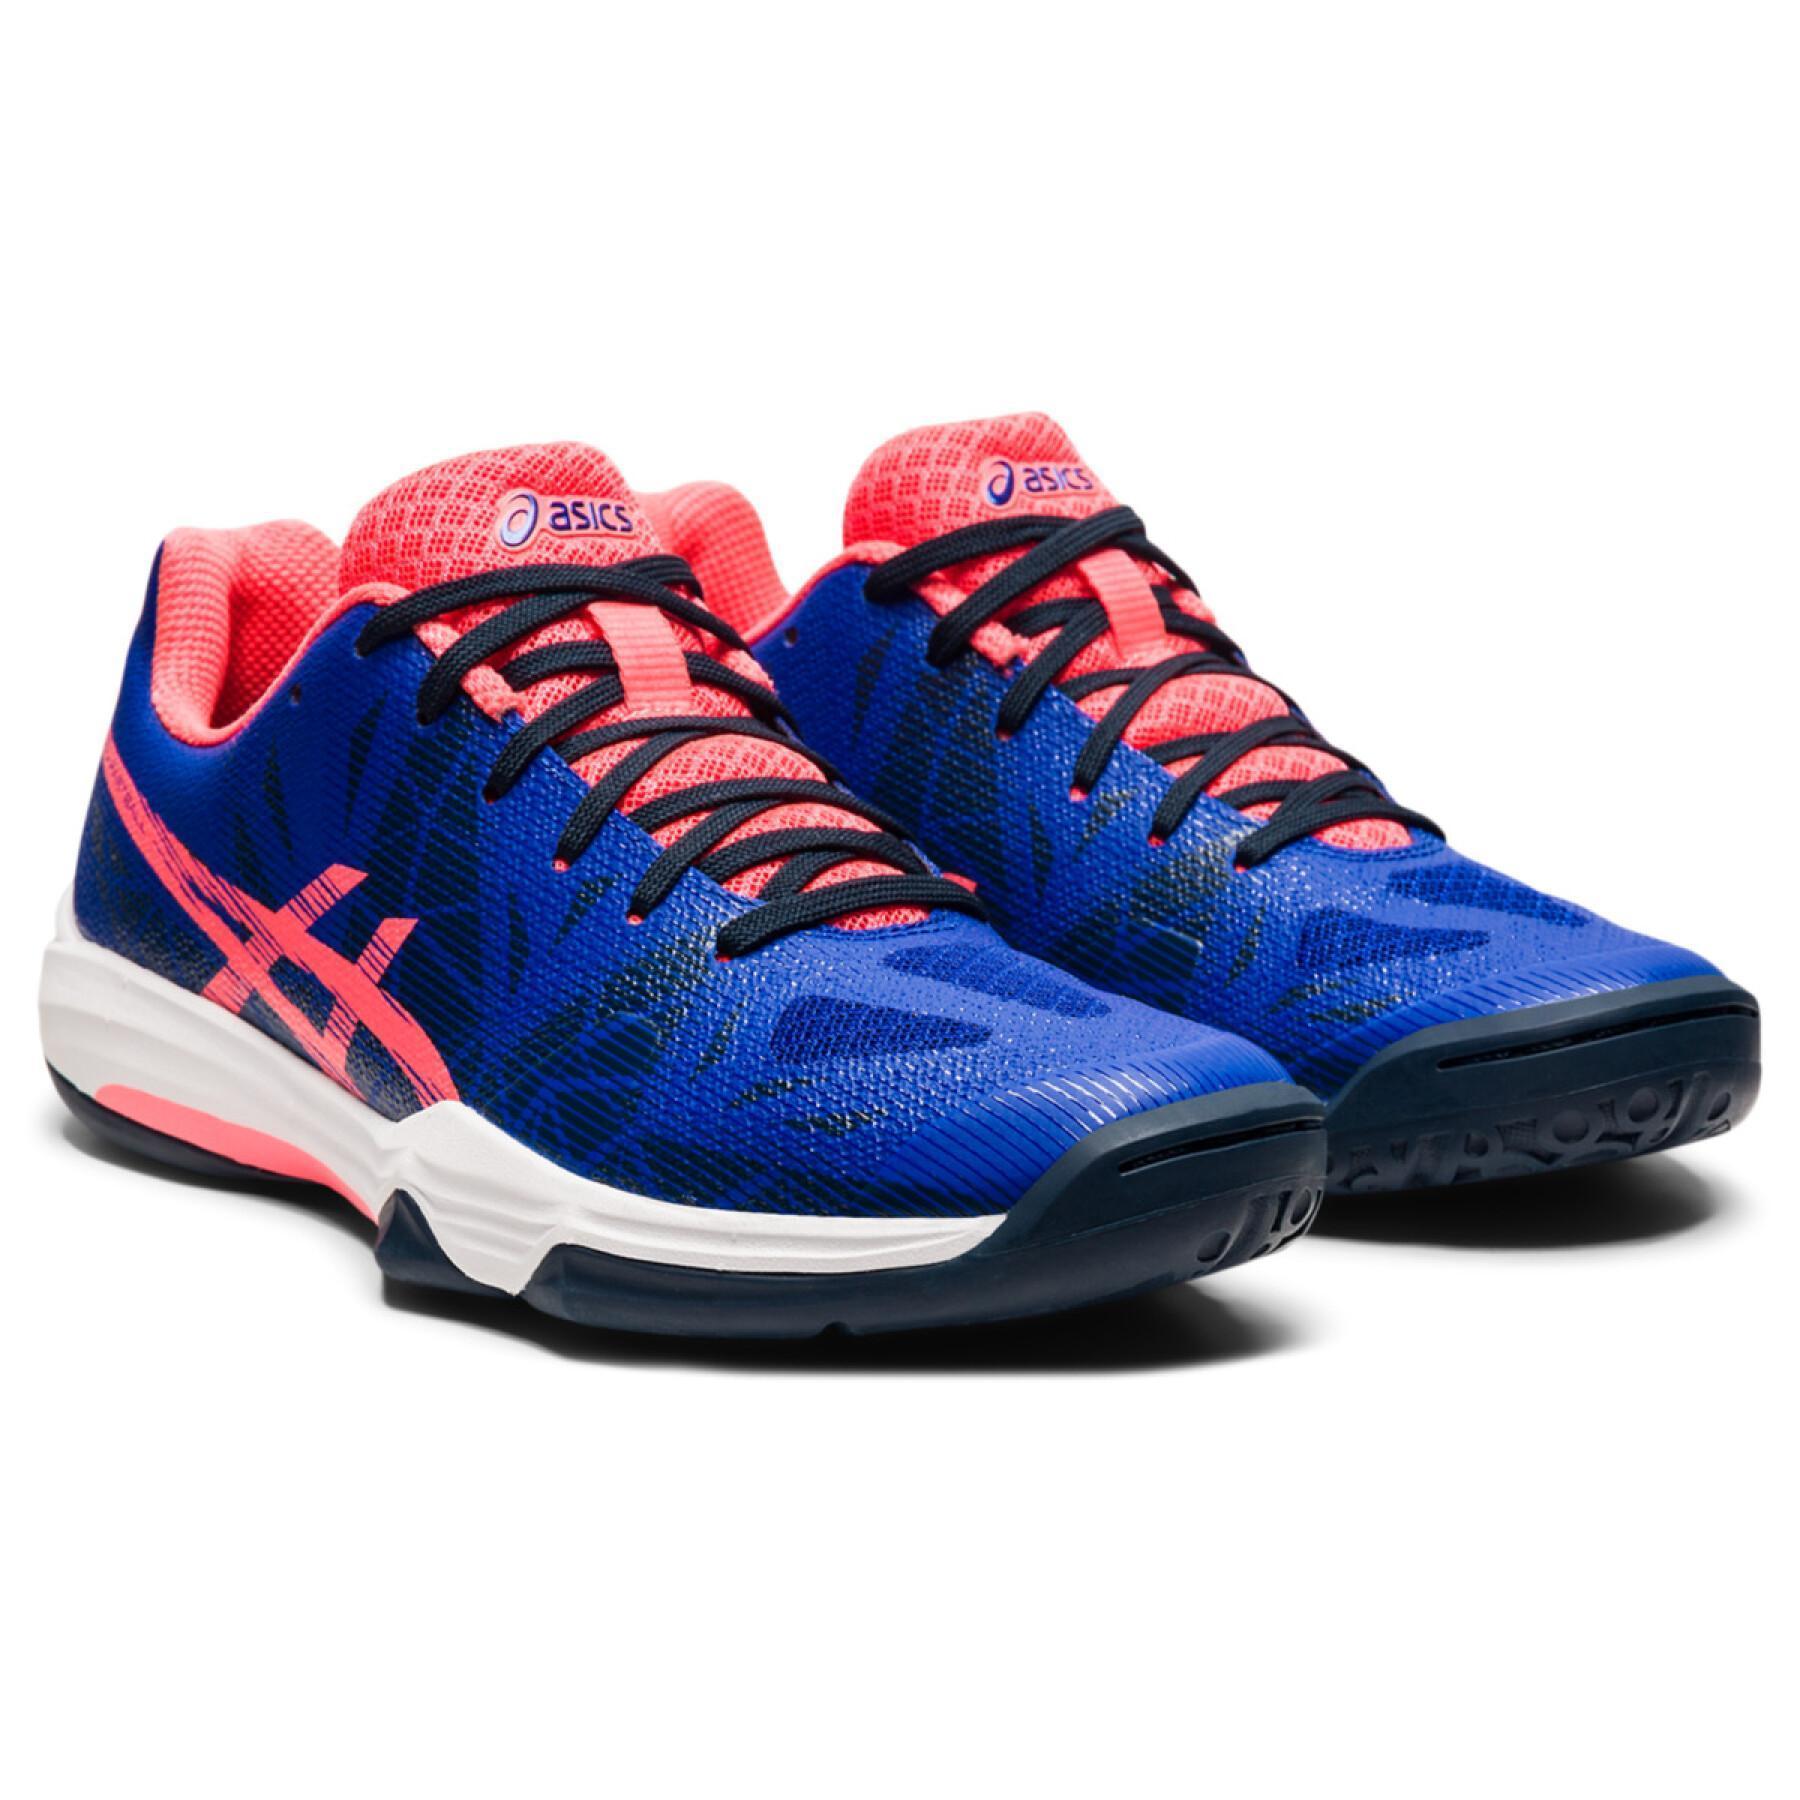 Women's shoes Asics Gel-Fastball 3 - Gel Fastball - Shoes